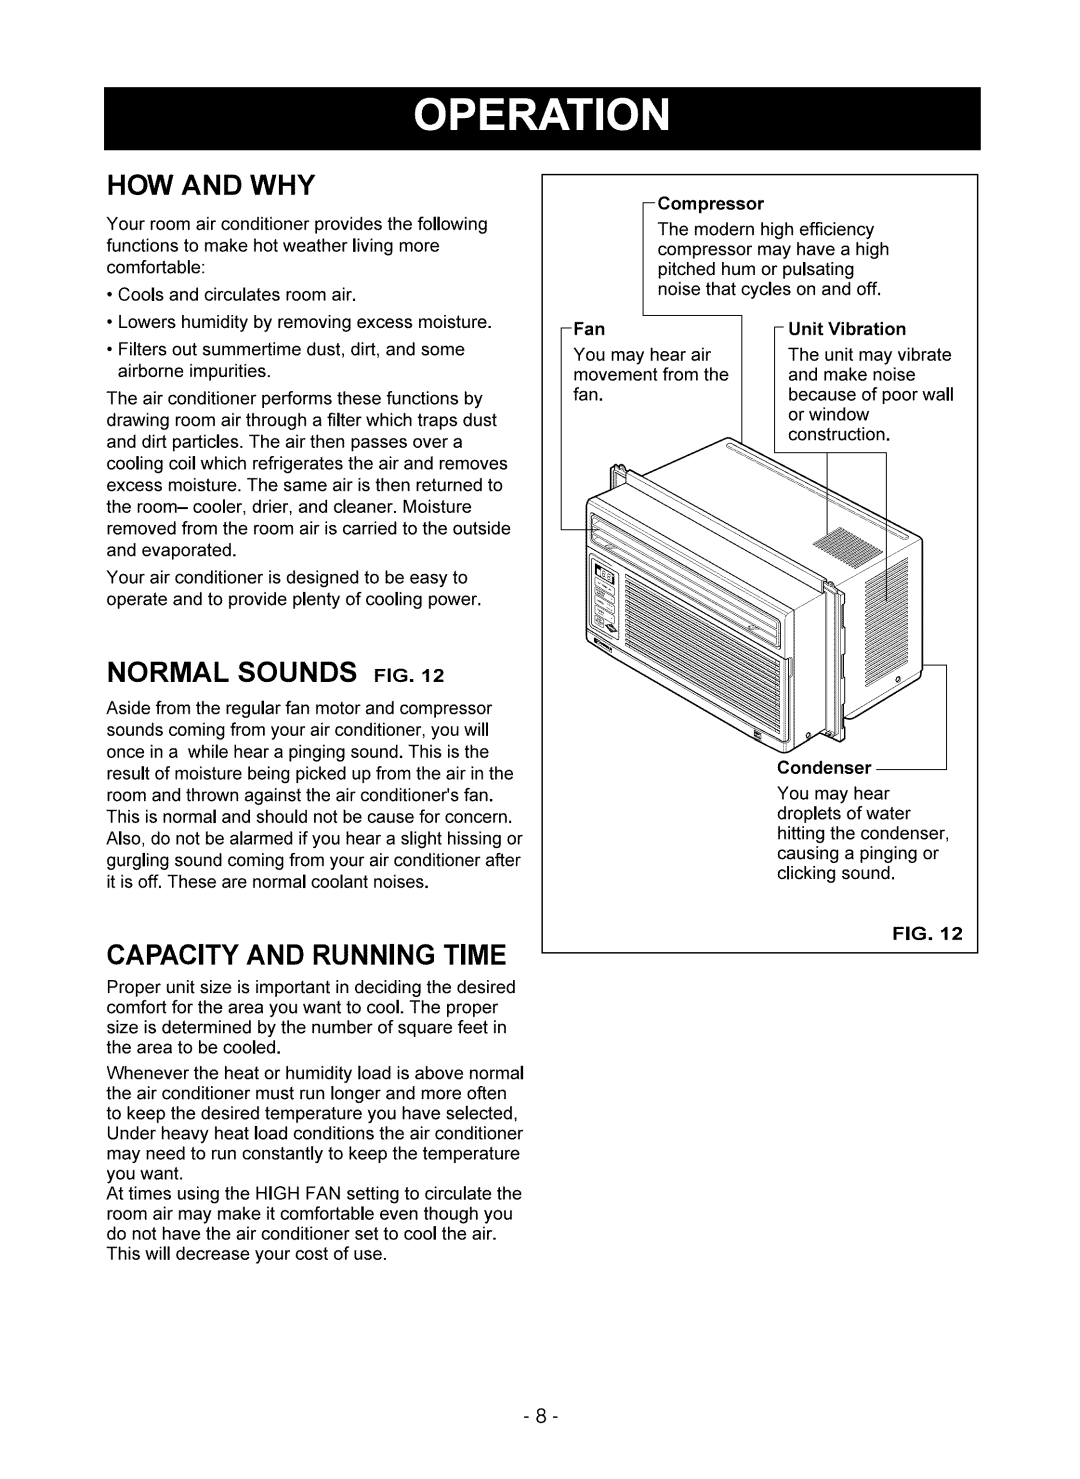 Kenmore 580.75051 owner manual How And Why, Normal Sounds, nit Vibration, Condenser 